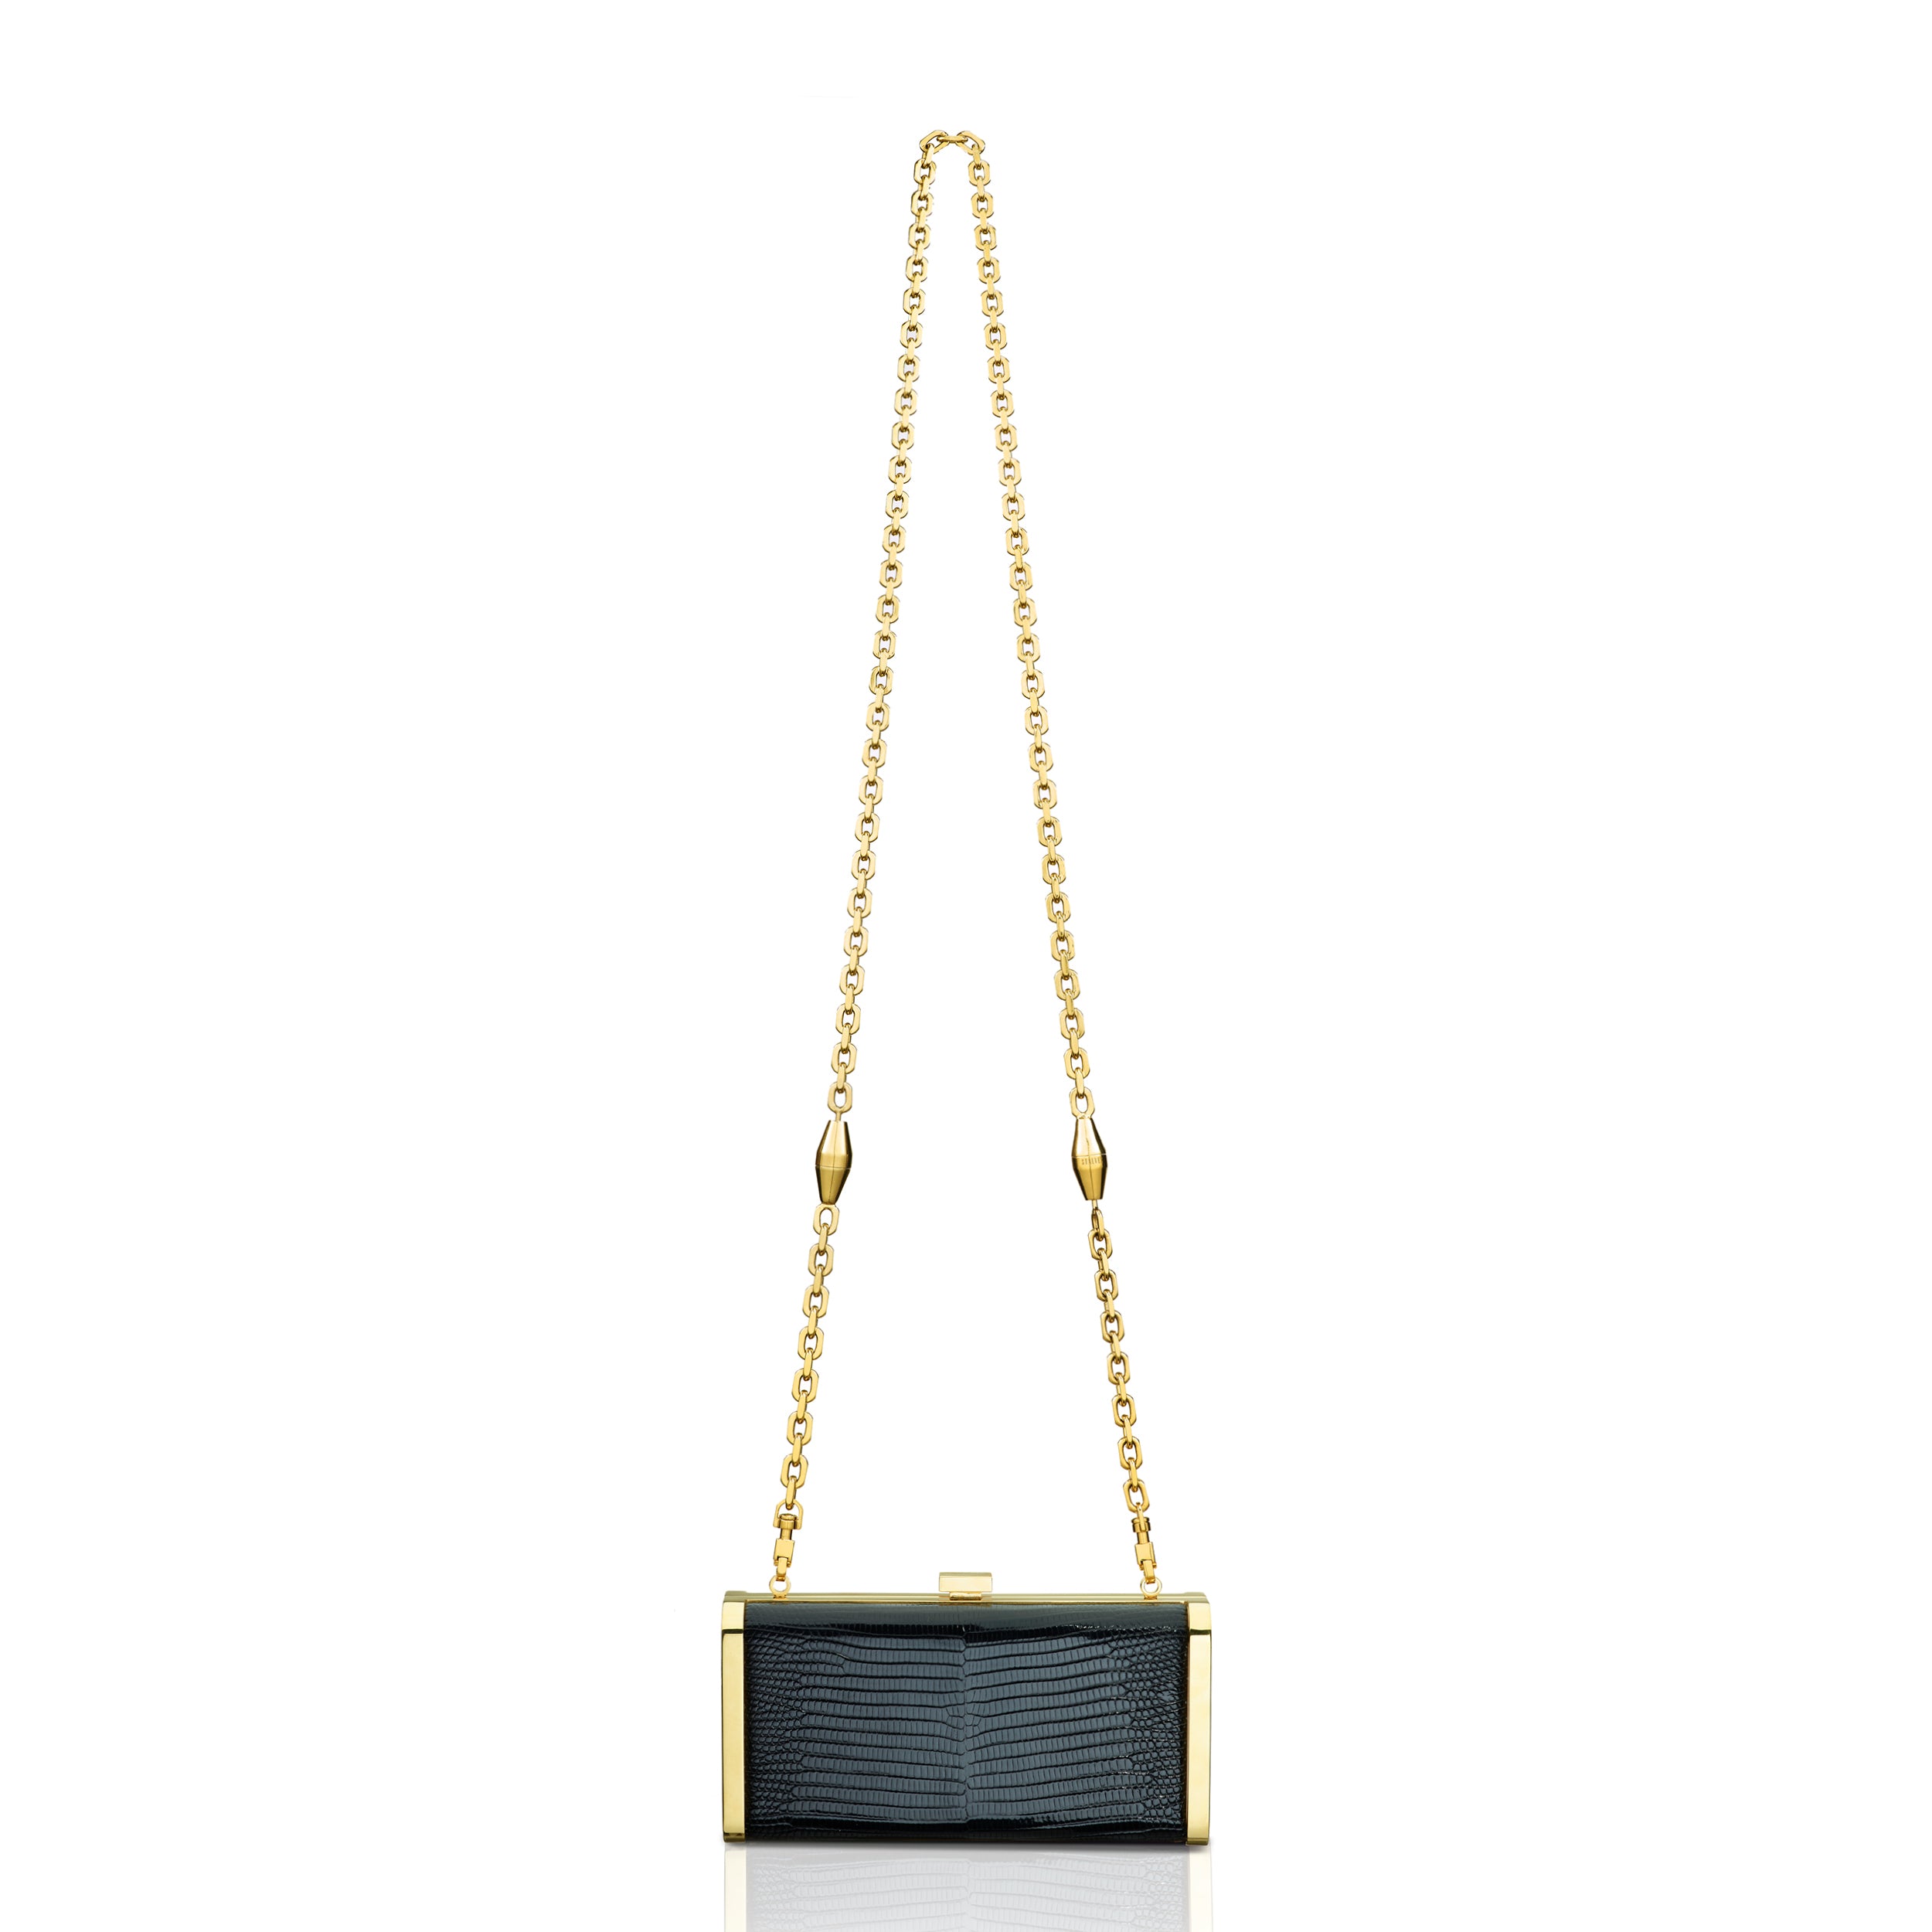 STALVEY Square Clutch in Black Lizard with 24kt Gold Hardware Front View with Chain